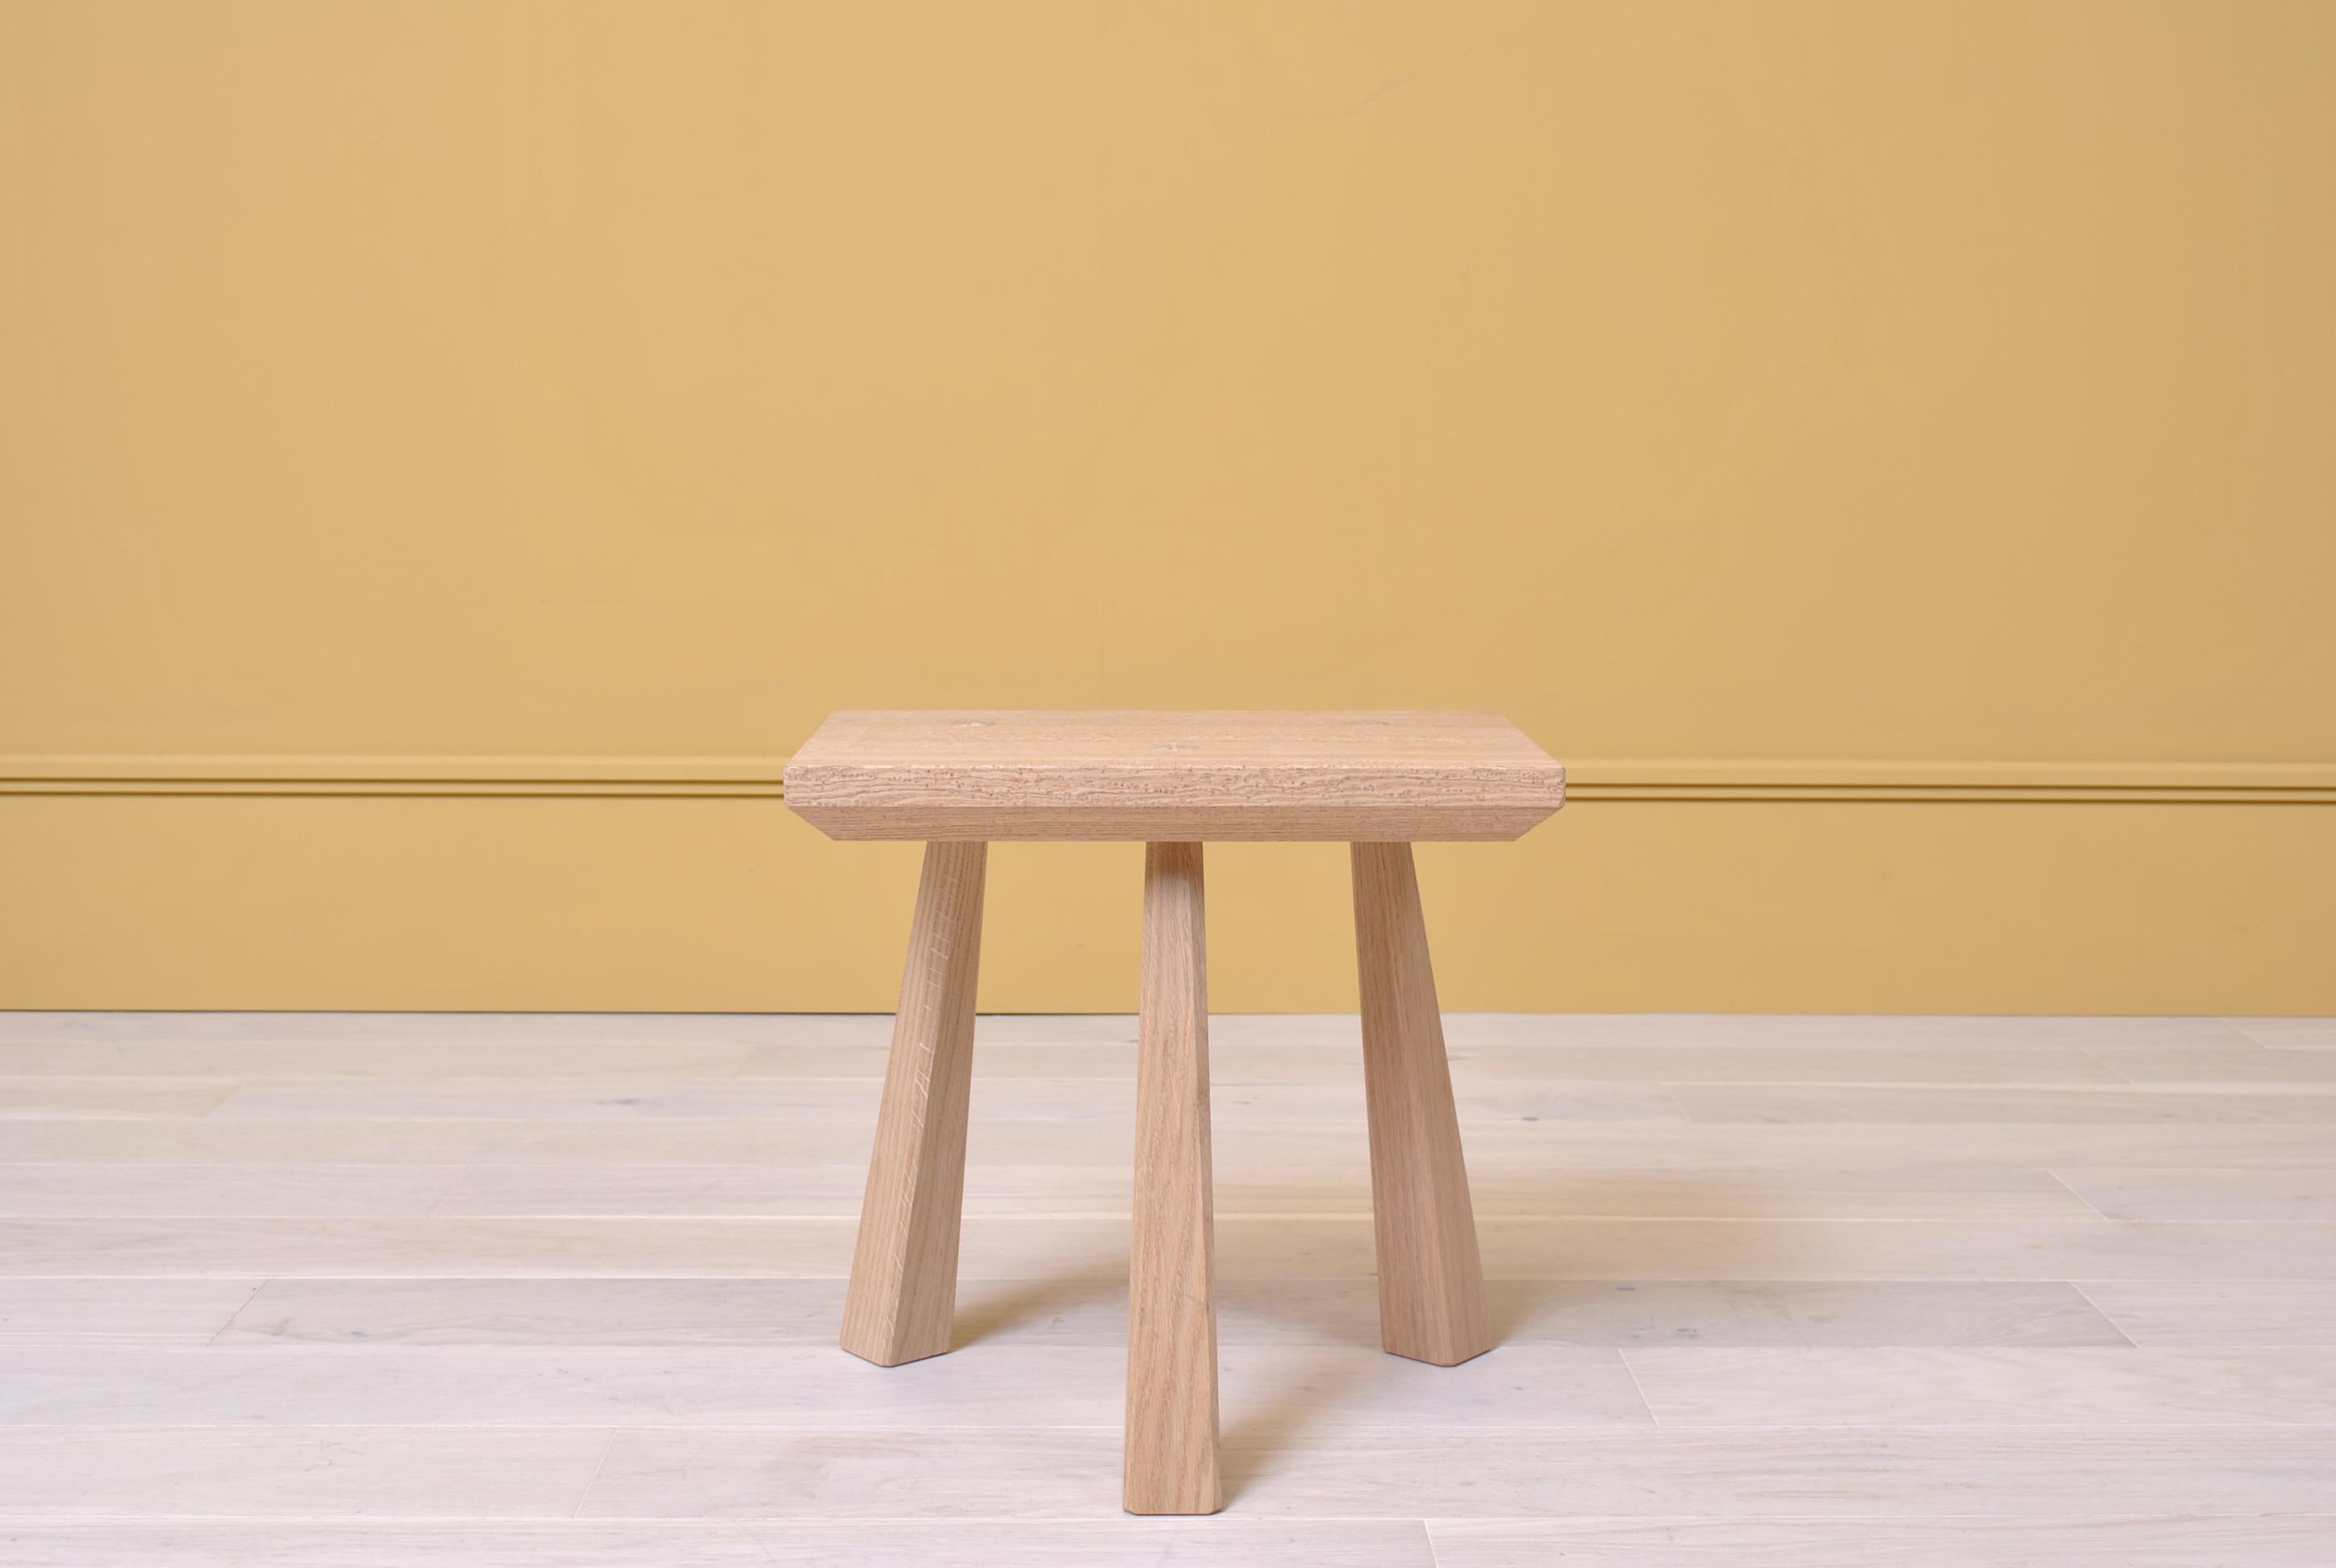 Hand-Crafted Handmade English Staked Legged Milking Stool